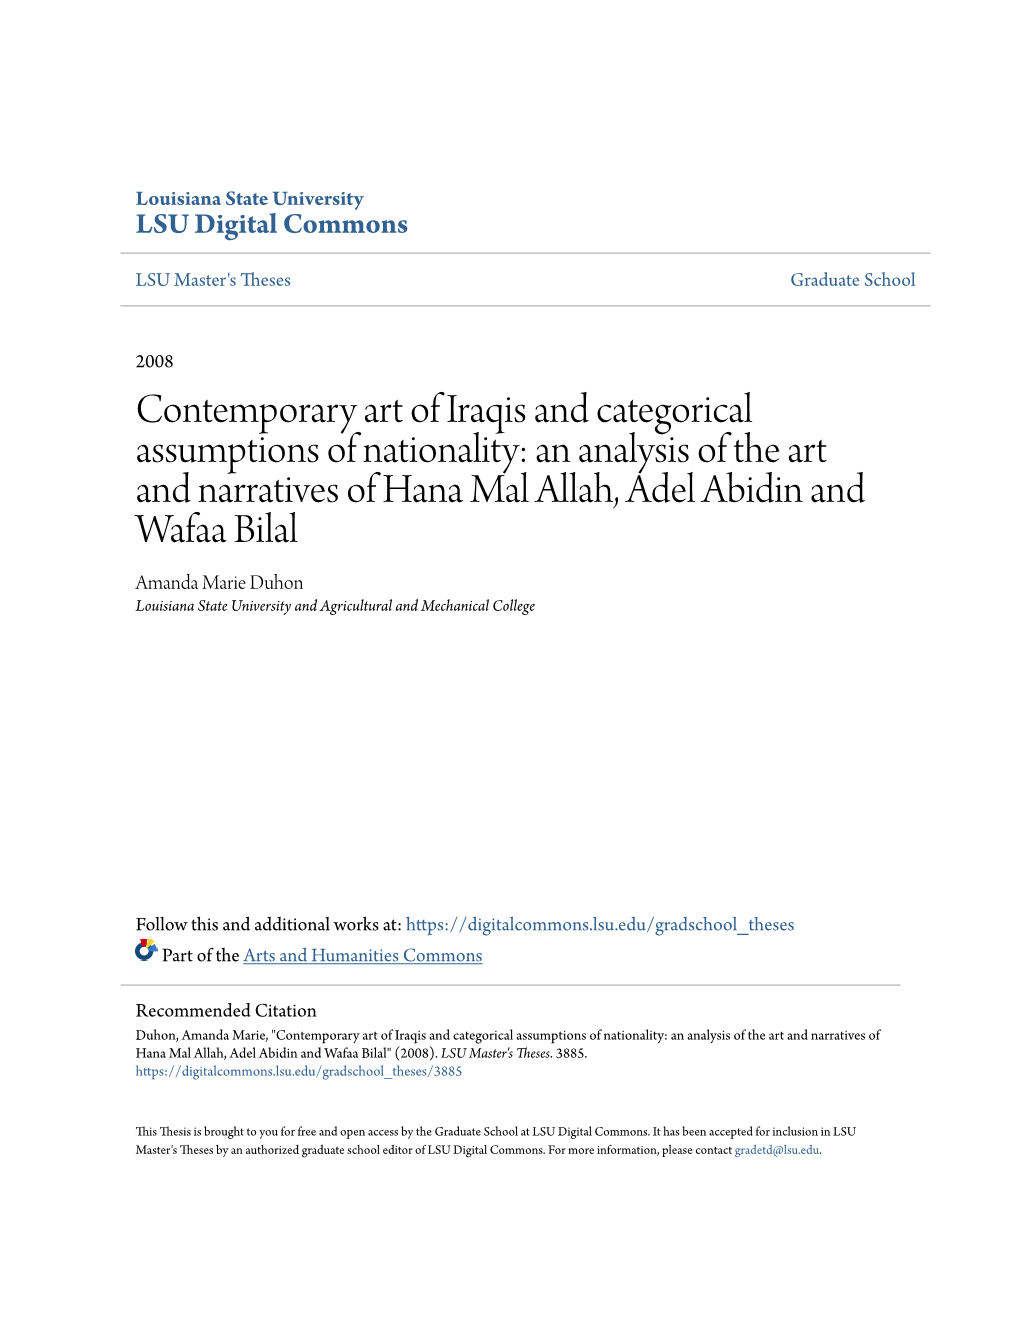 Contemporary Art of Iraqis and Categorical Assumptions of Nationality